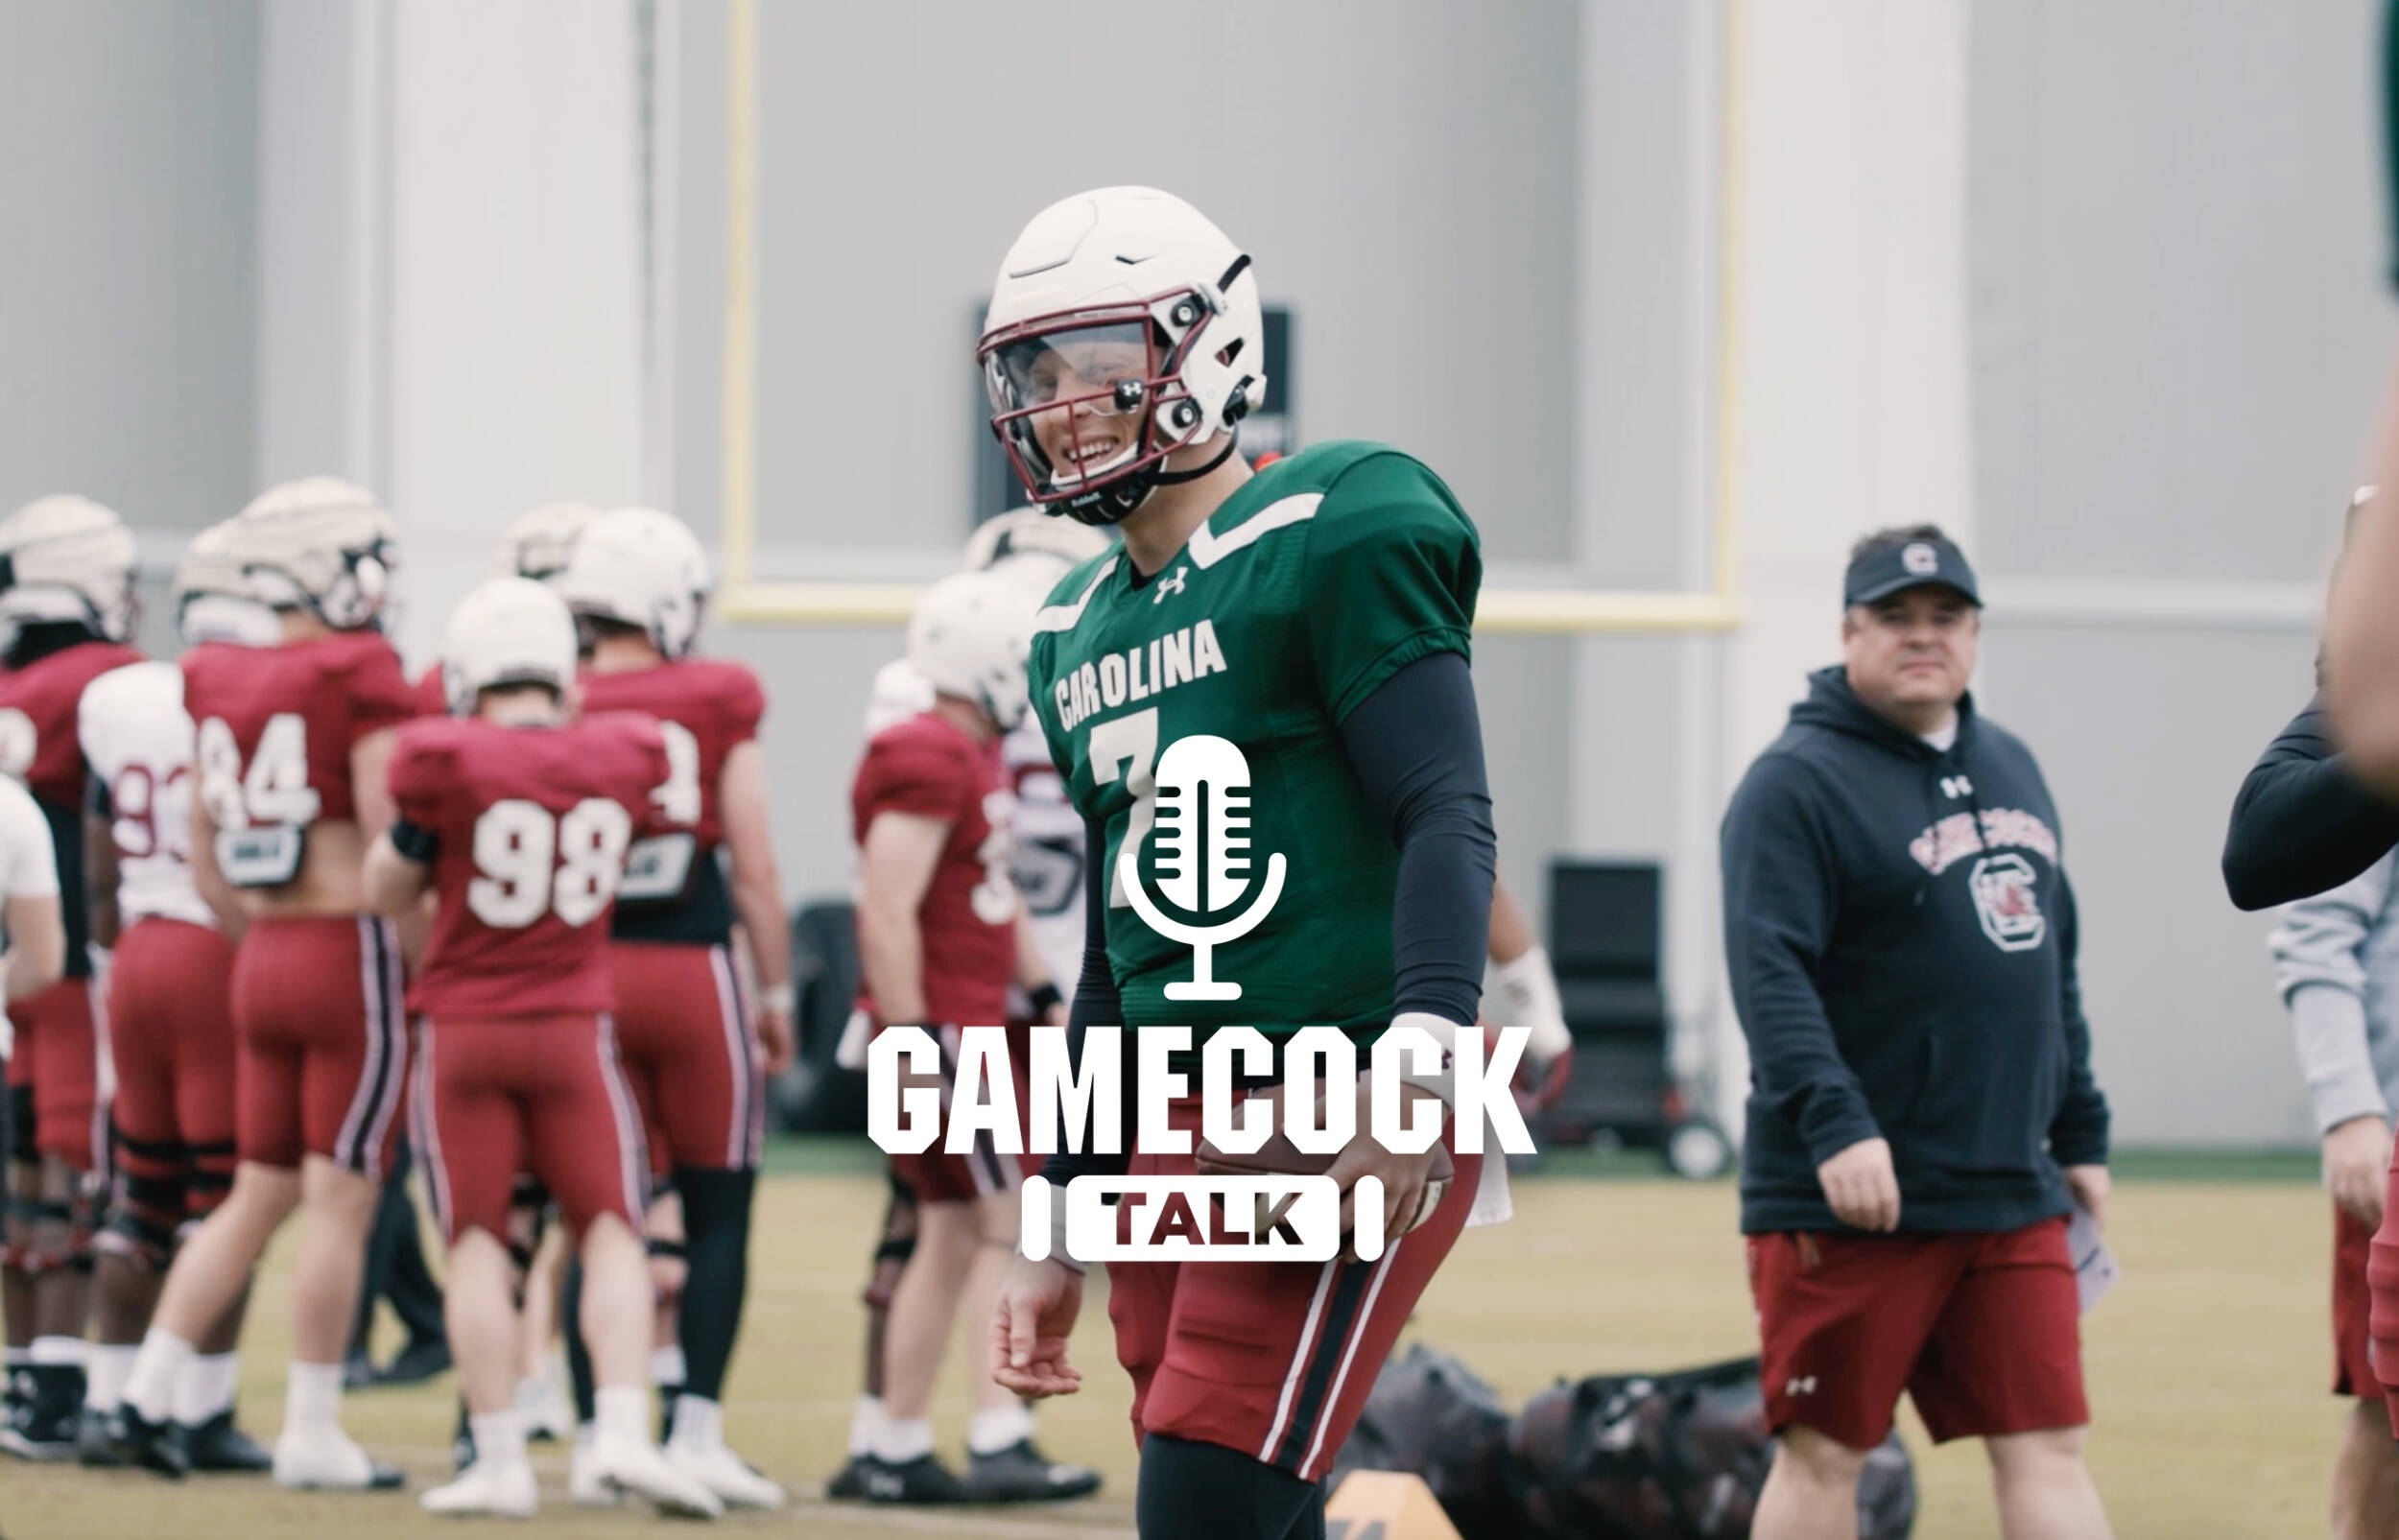 Gamecock Talk: How Spencer Rattler Can Be Even Better in 2023 (with QB Trainer Mike Giovando)